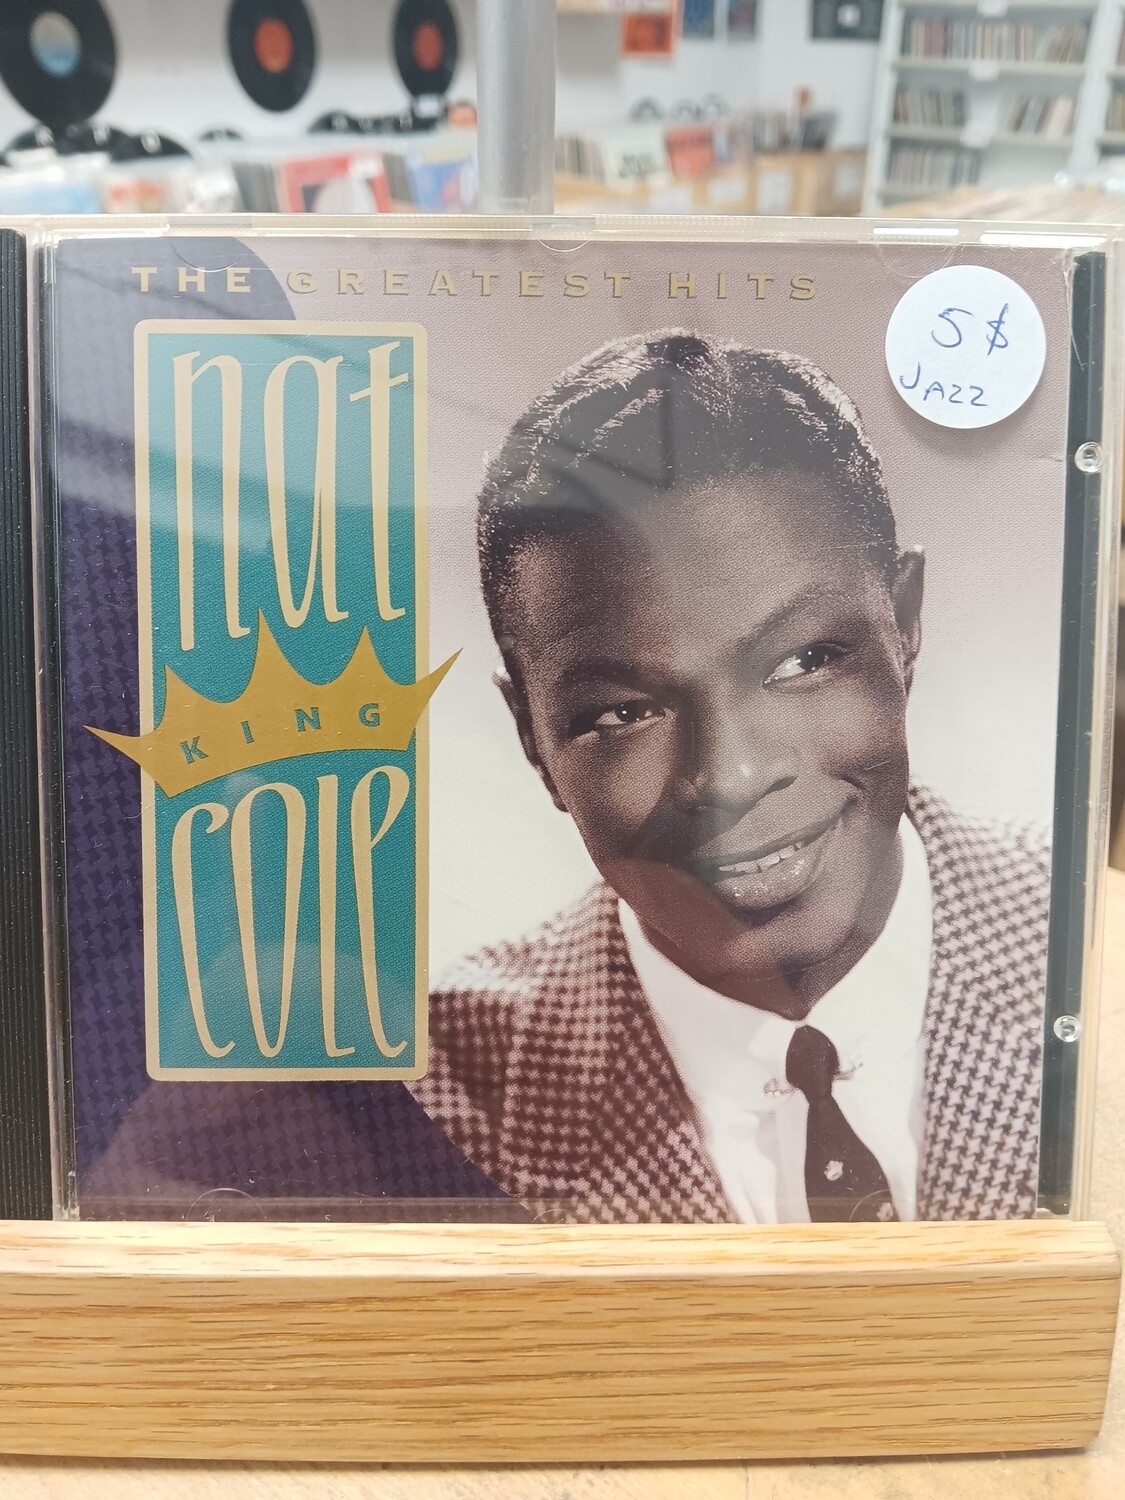 NAT KING COLE - The Greatest Hits (CD)